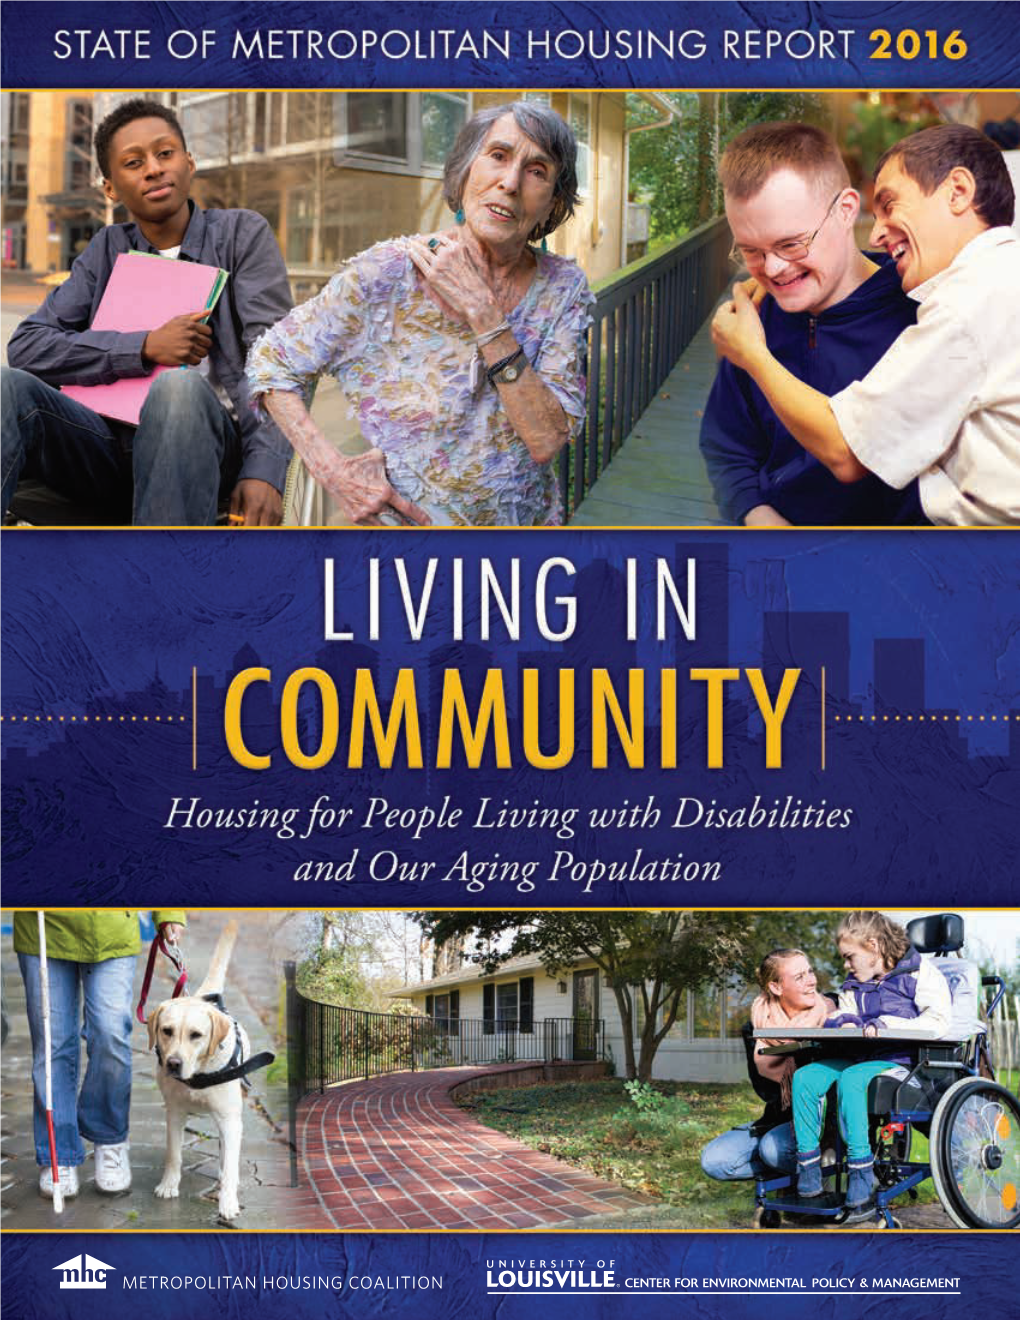 2016 State of Metropolitan Housing Report Ii LIVING in COMMUNITY Fair, Accessible, and Affordable Housing for People Living with Disabilities and Our Aging Population